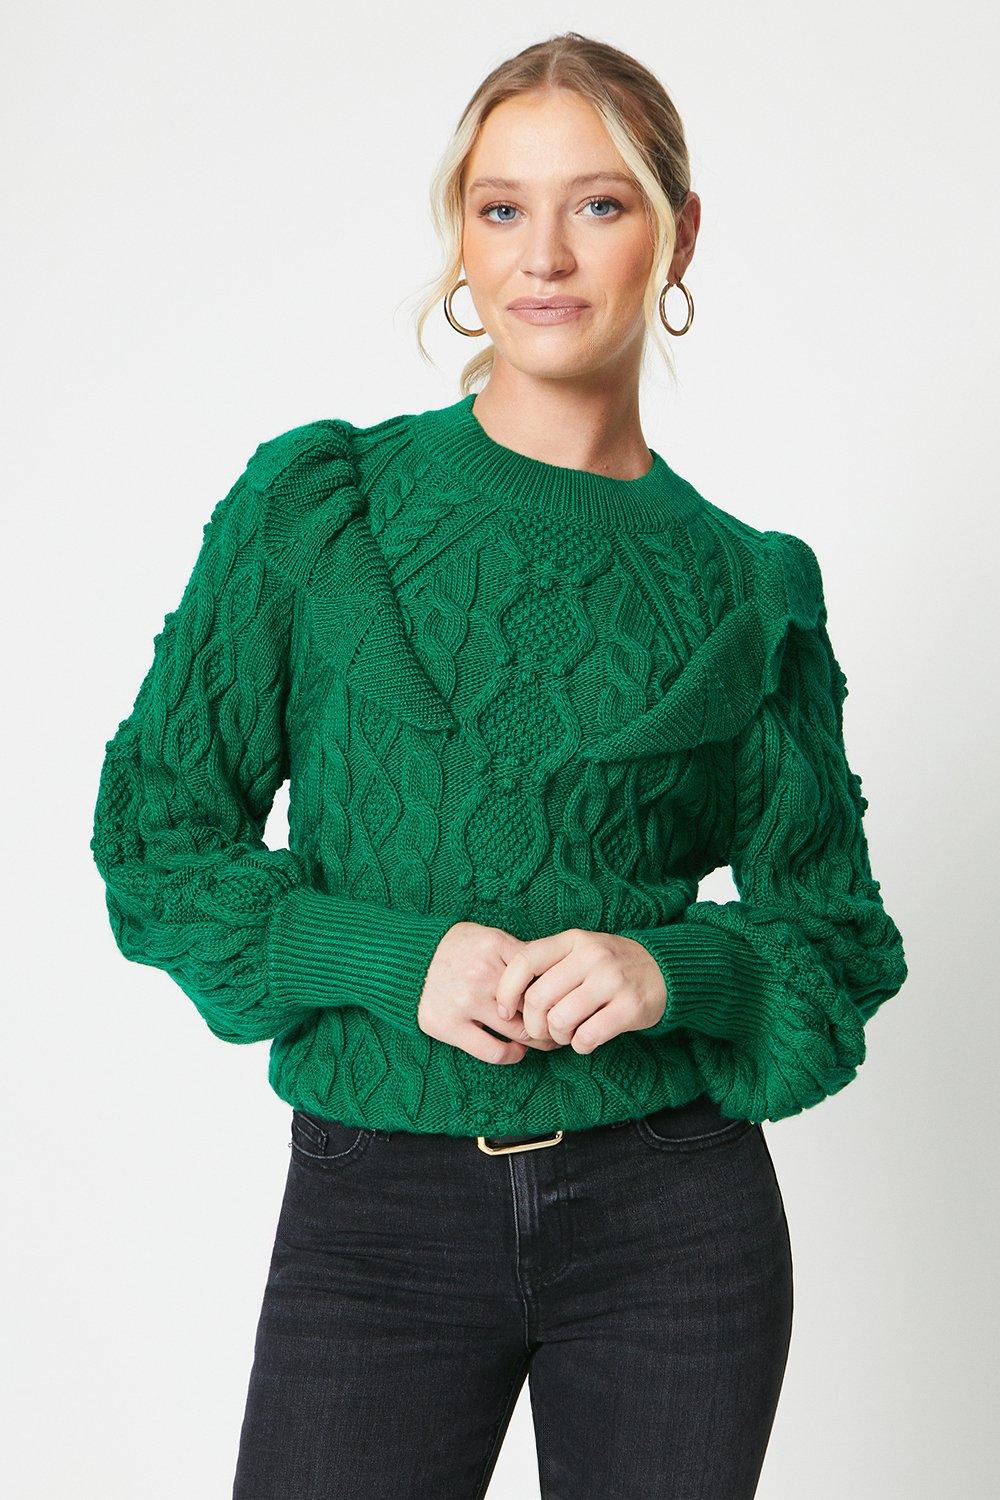 Women’s Ruffle Cable Knit Bobble Jumper - green - S